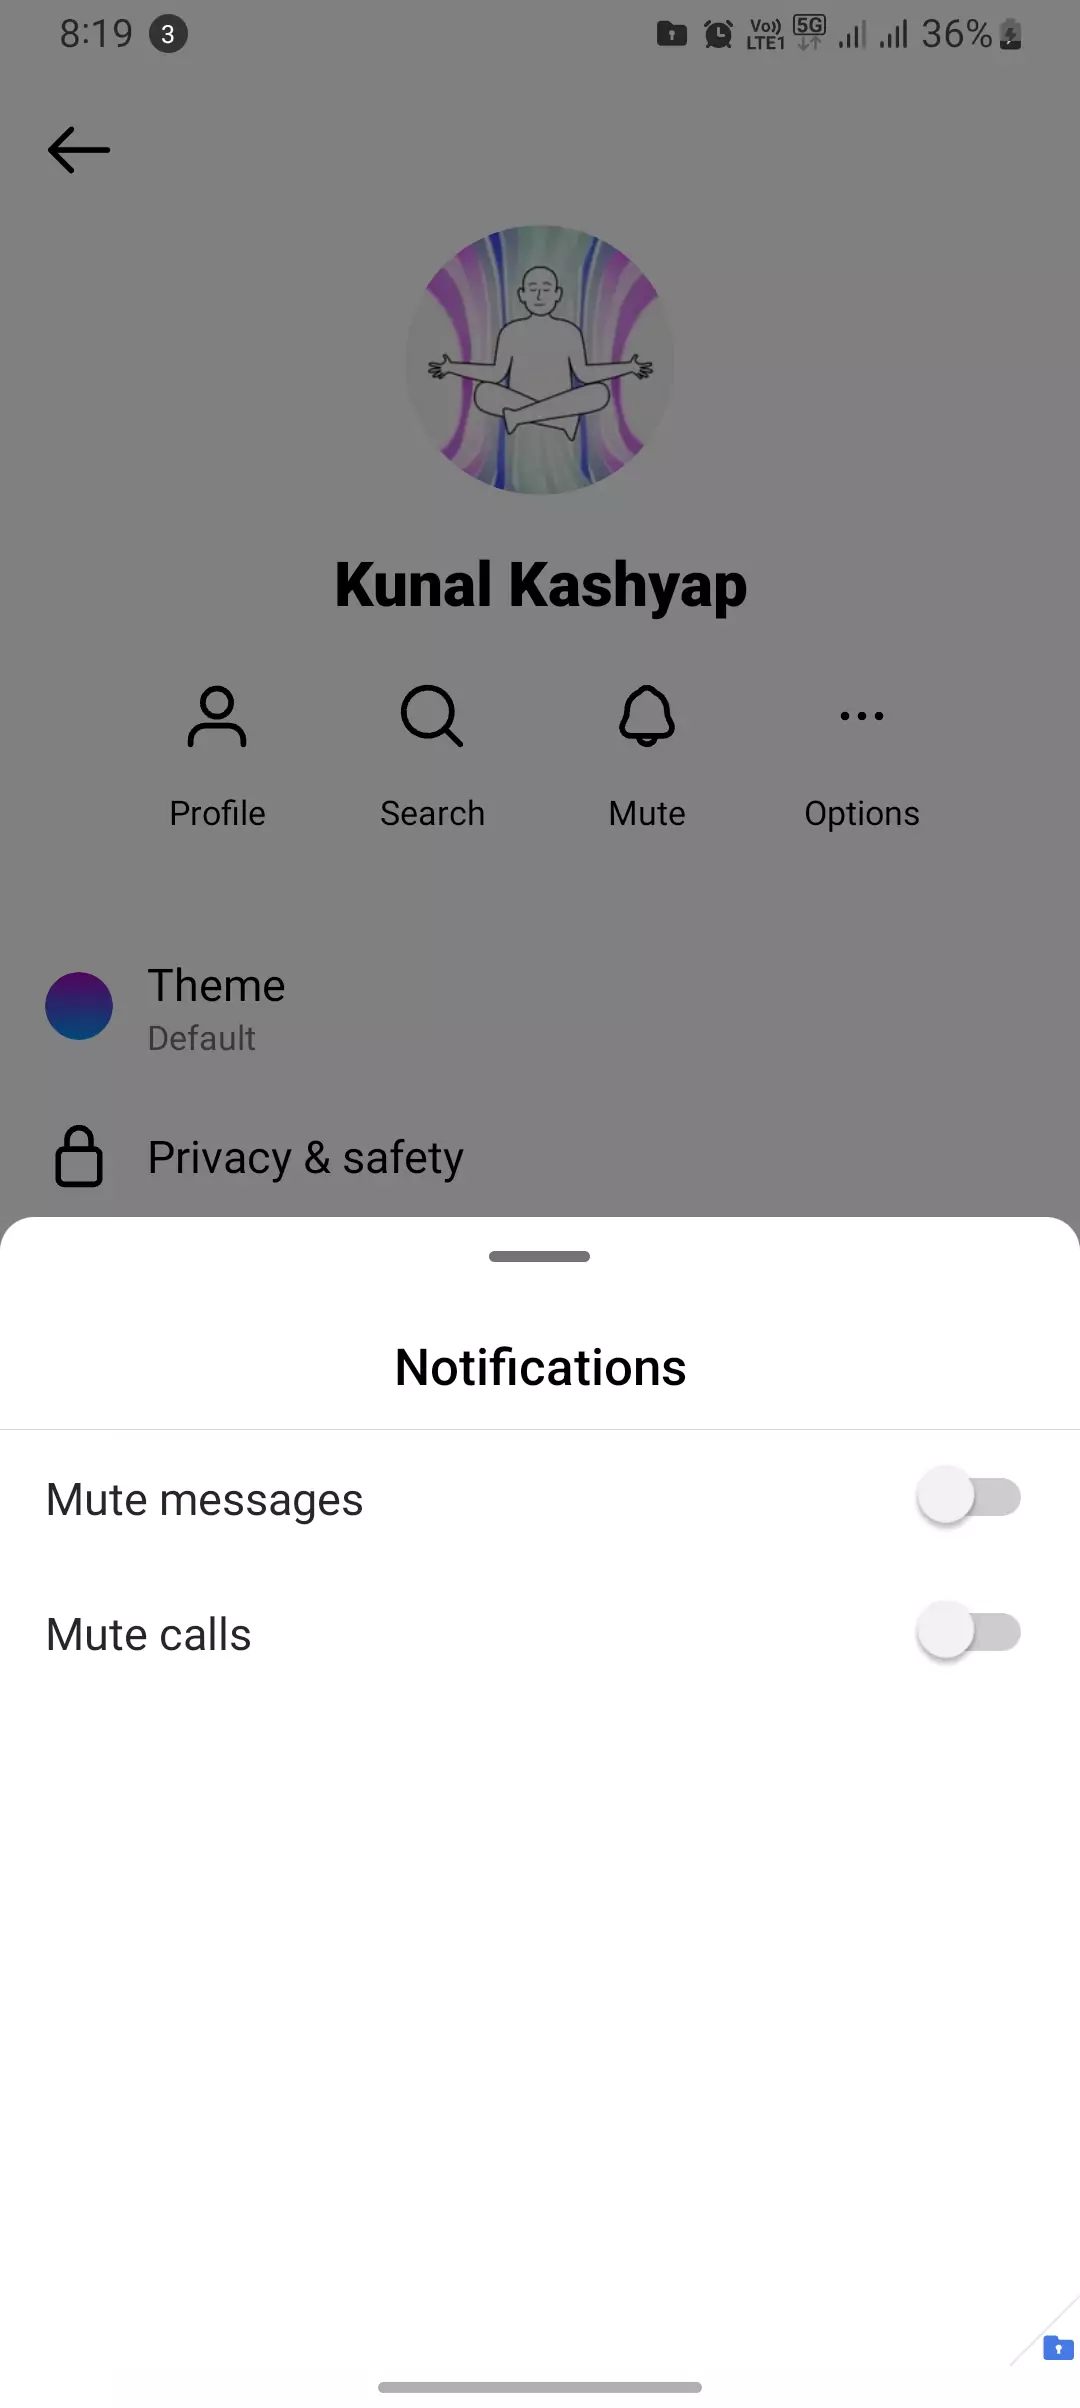 mute options for specific person or groups